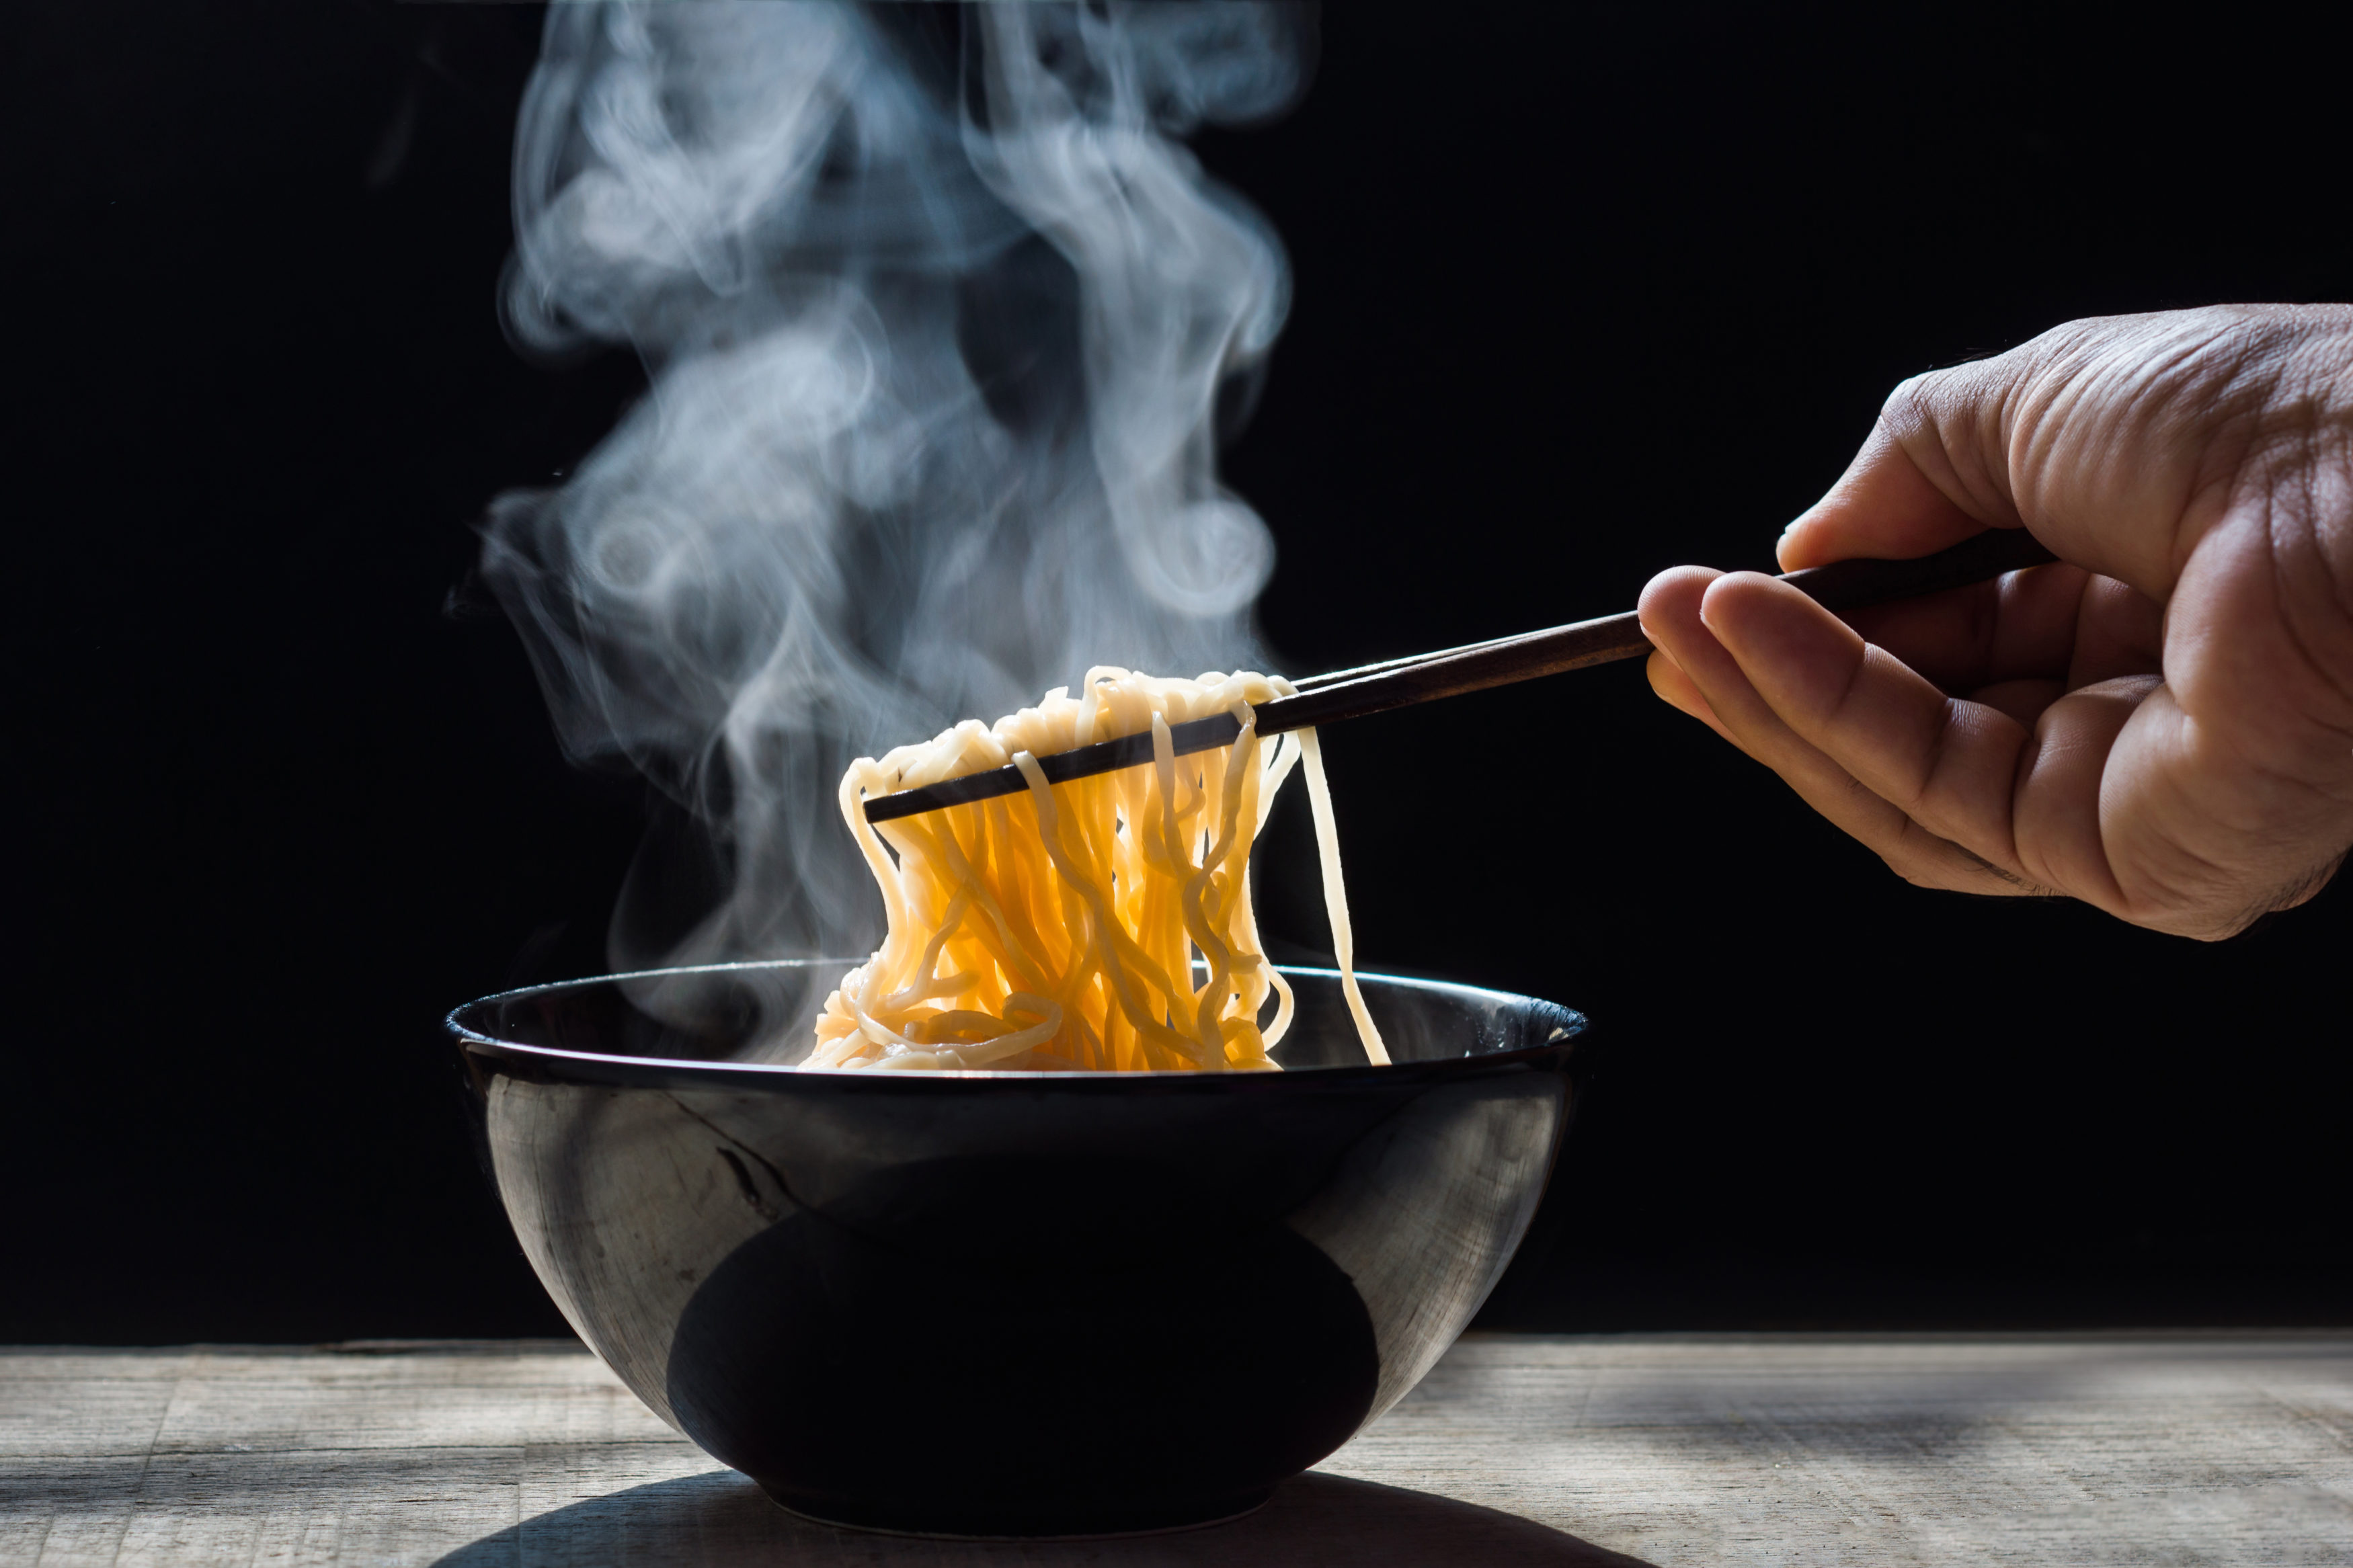 Hand uses chopsticks to pickup tasty noodles with steam and smoke in bowl on wooden background, selective focus.  Top view, Asian meal on a table, junk food concept